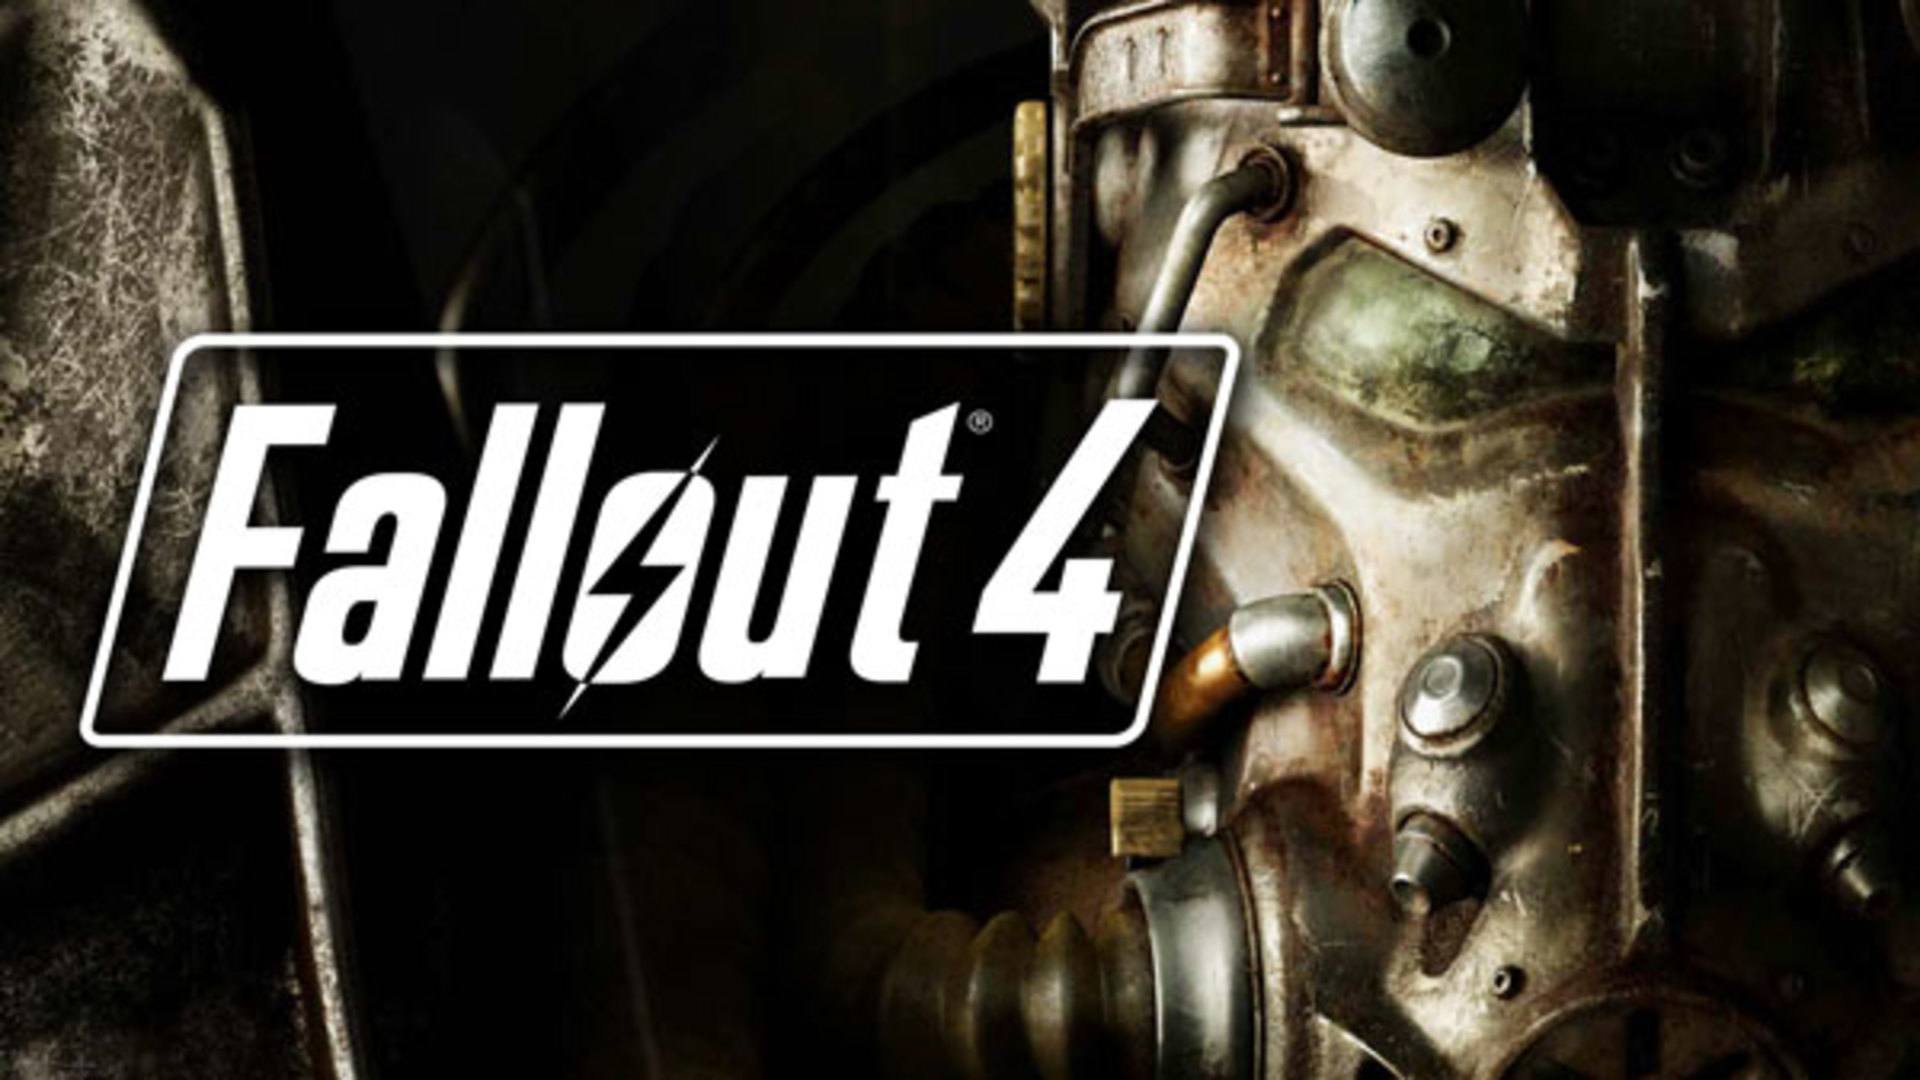 Fallout 4 Full Crack Latest PC Game Free Download With Keygen